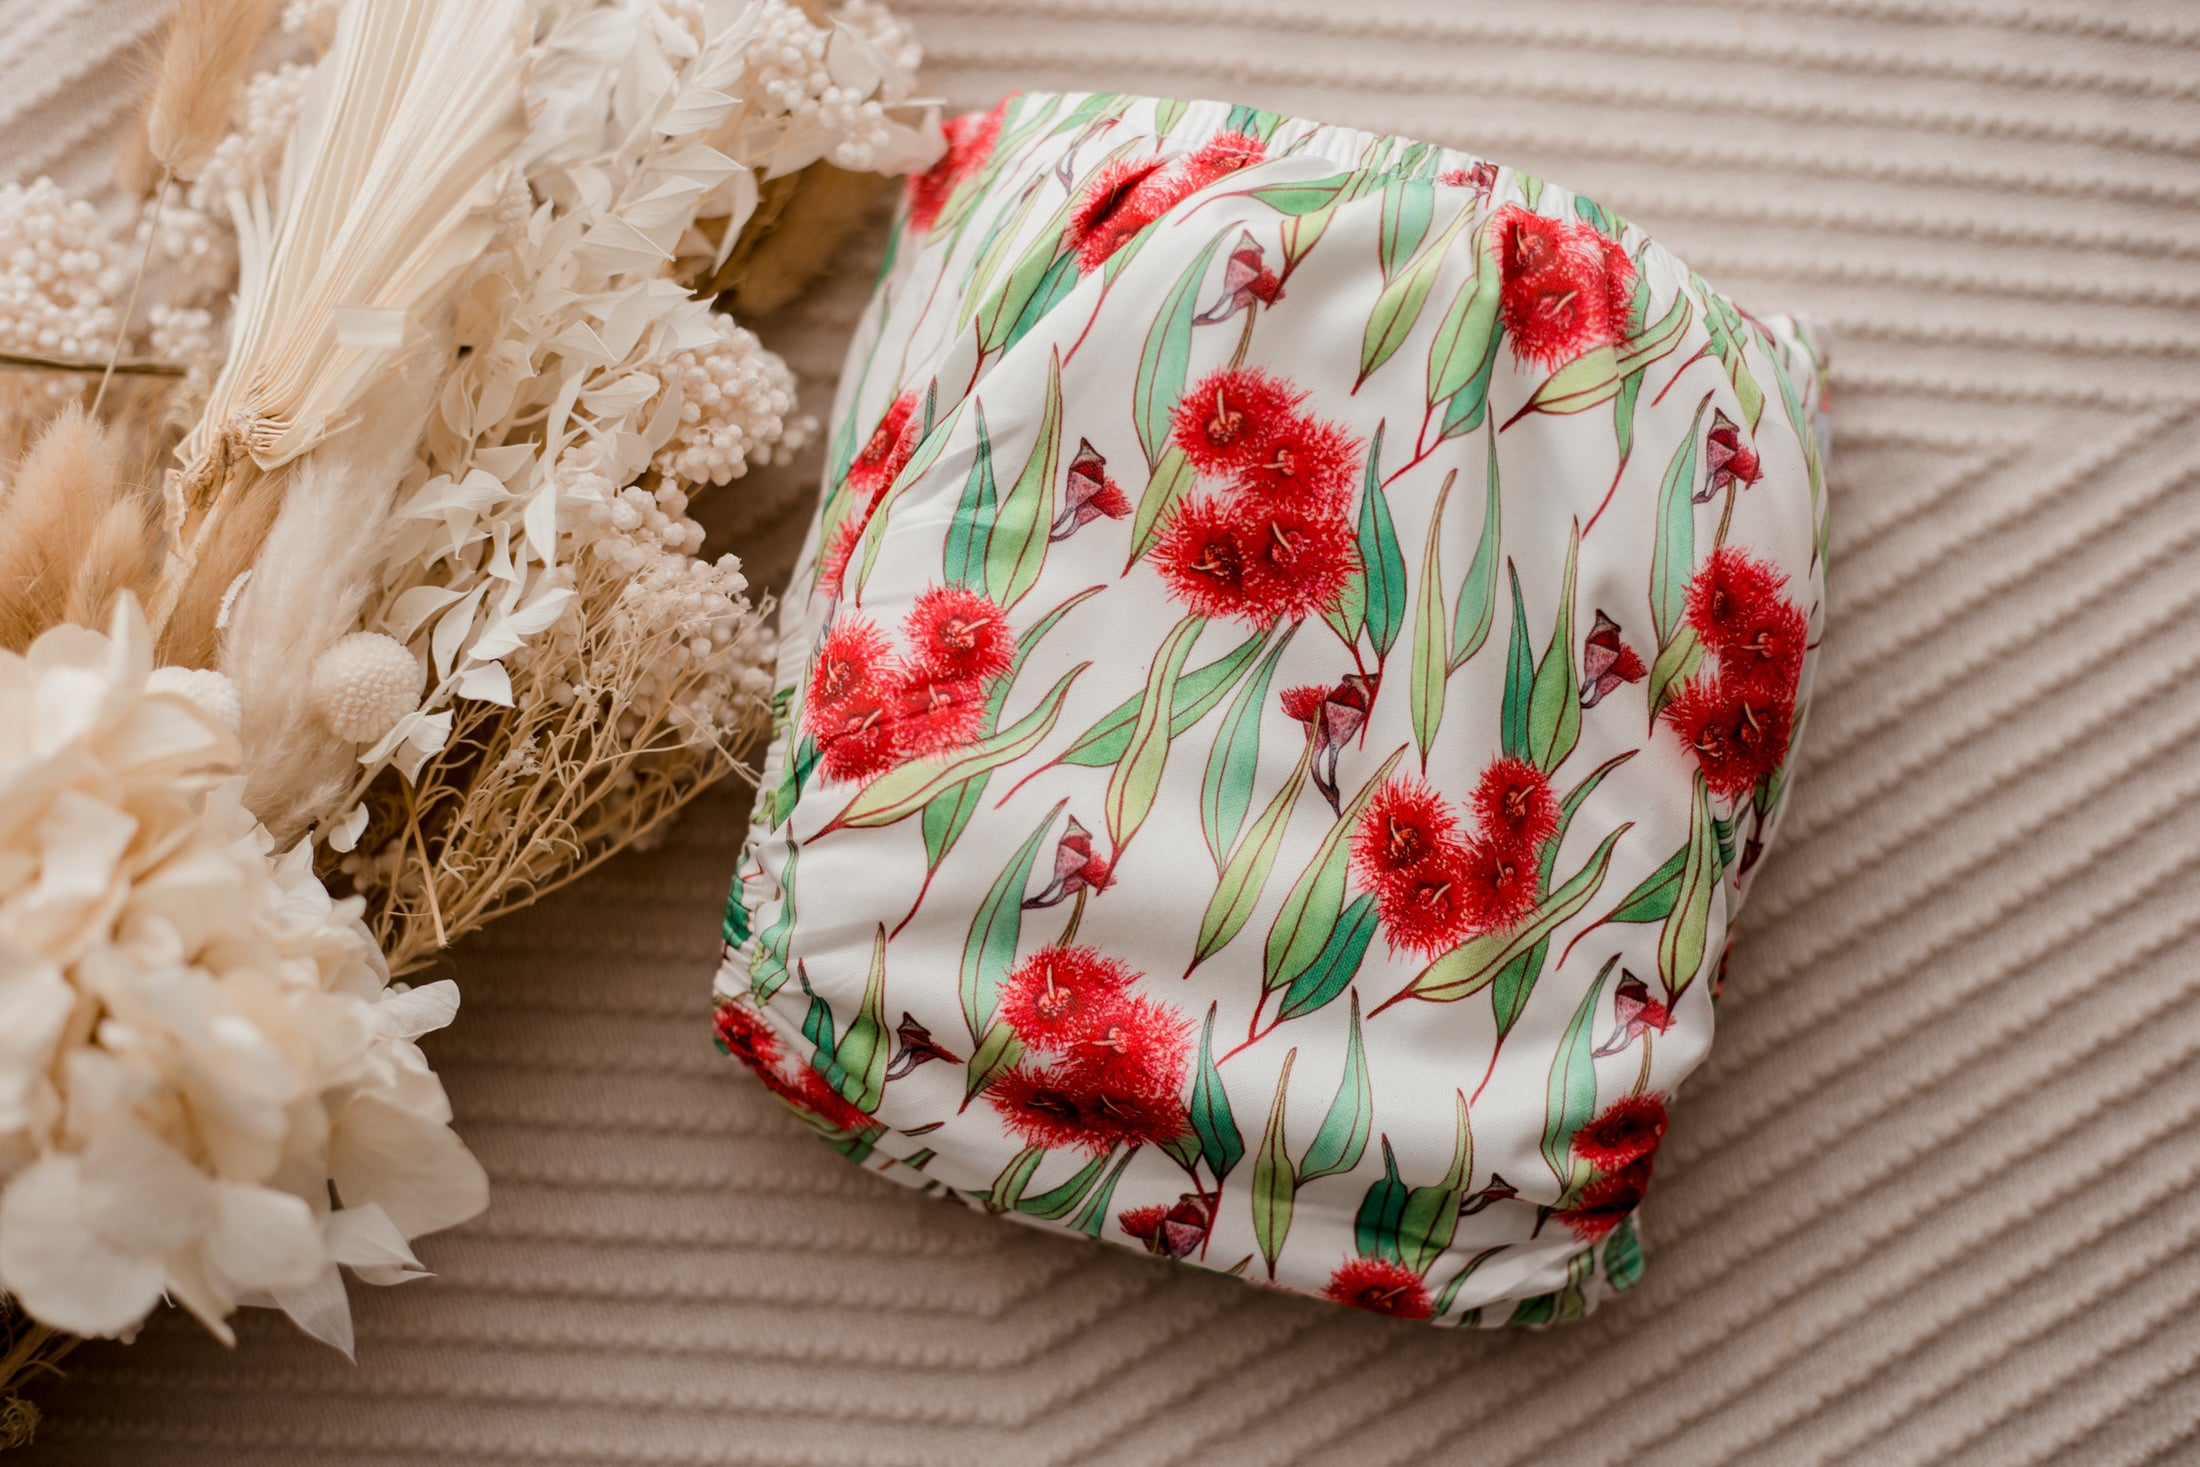 Australian cloth nappies. Reusable diapers. flowering gum australiana cloth nappy. My little gumnut. reusable nappies australia.